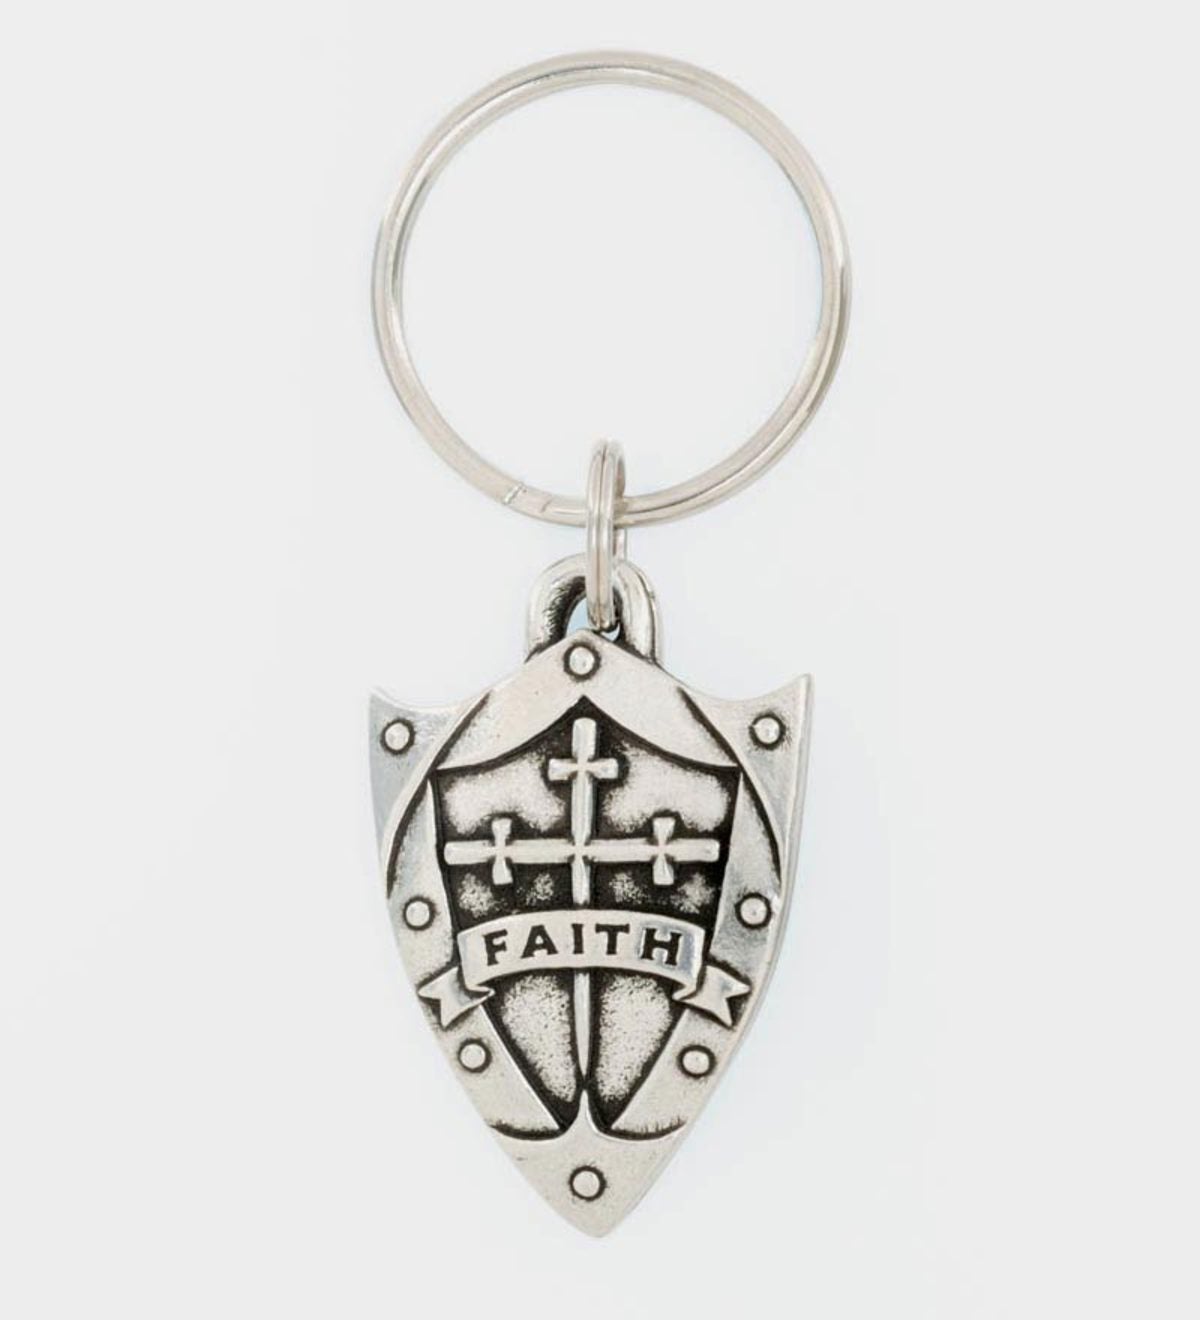 Pewter Key Rings with Bible Verses - Hope | Wind and Weather